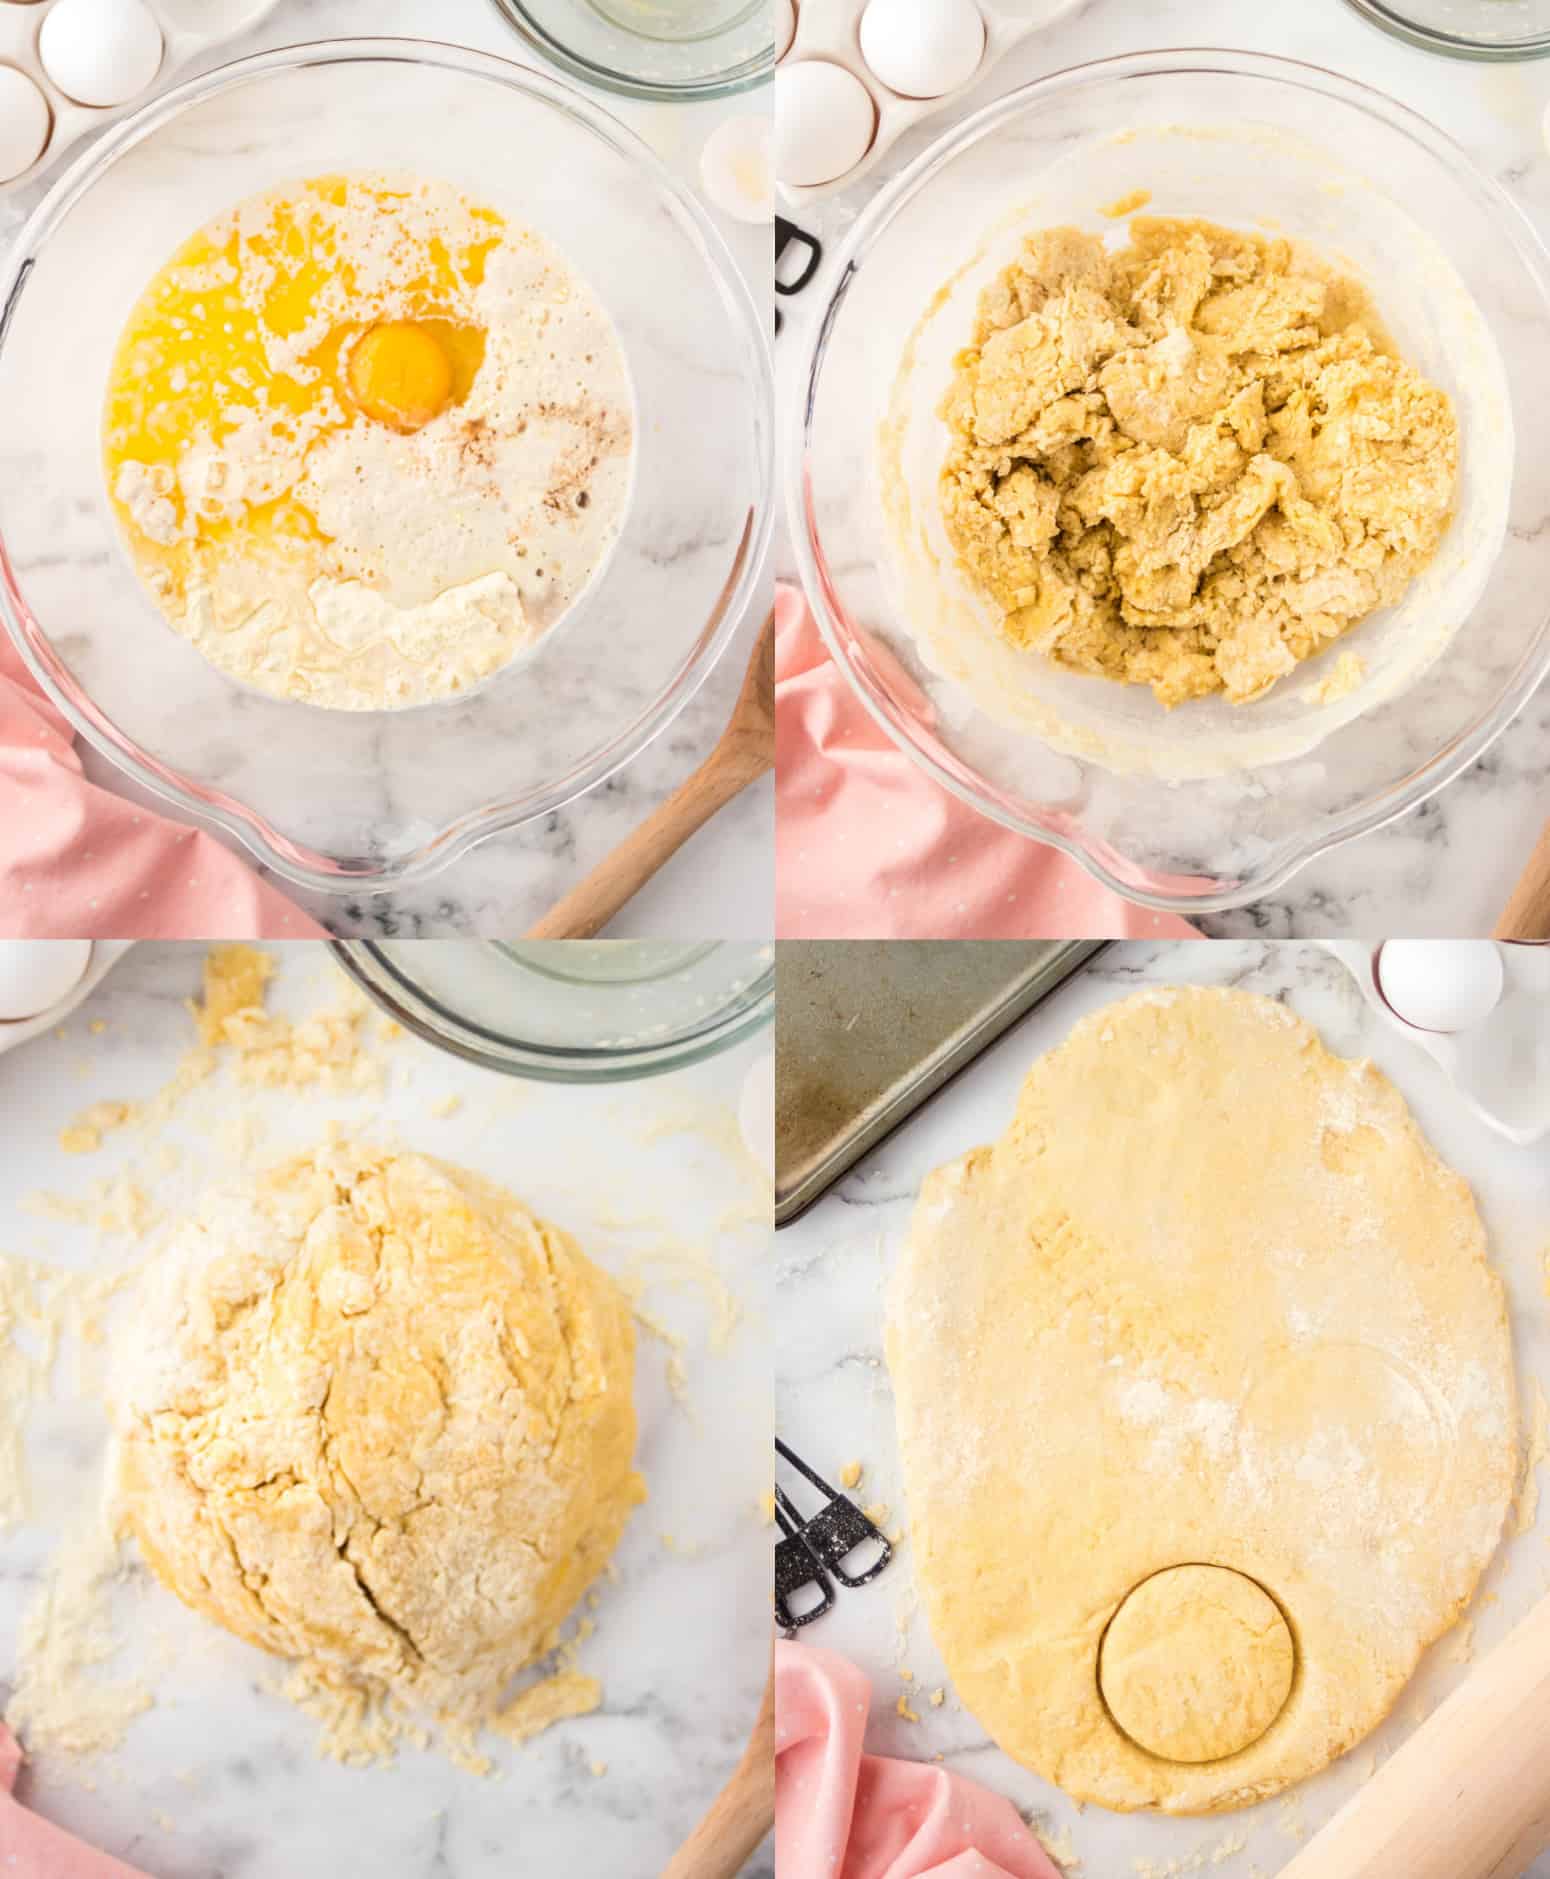 Four process photos. First one, wet ingredients placed in a bowl. Second one, dough all mixed up. Third one, a dough pileready to be rolled out. Fourth one, dough all rolled out and a donut cutter.